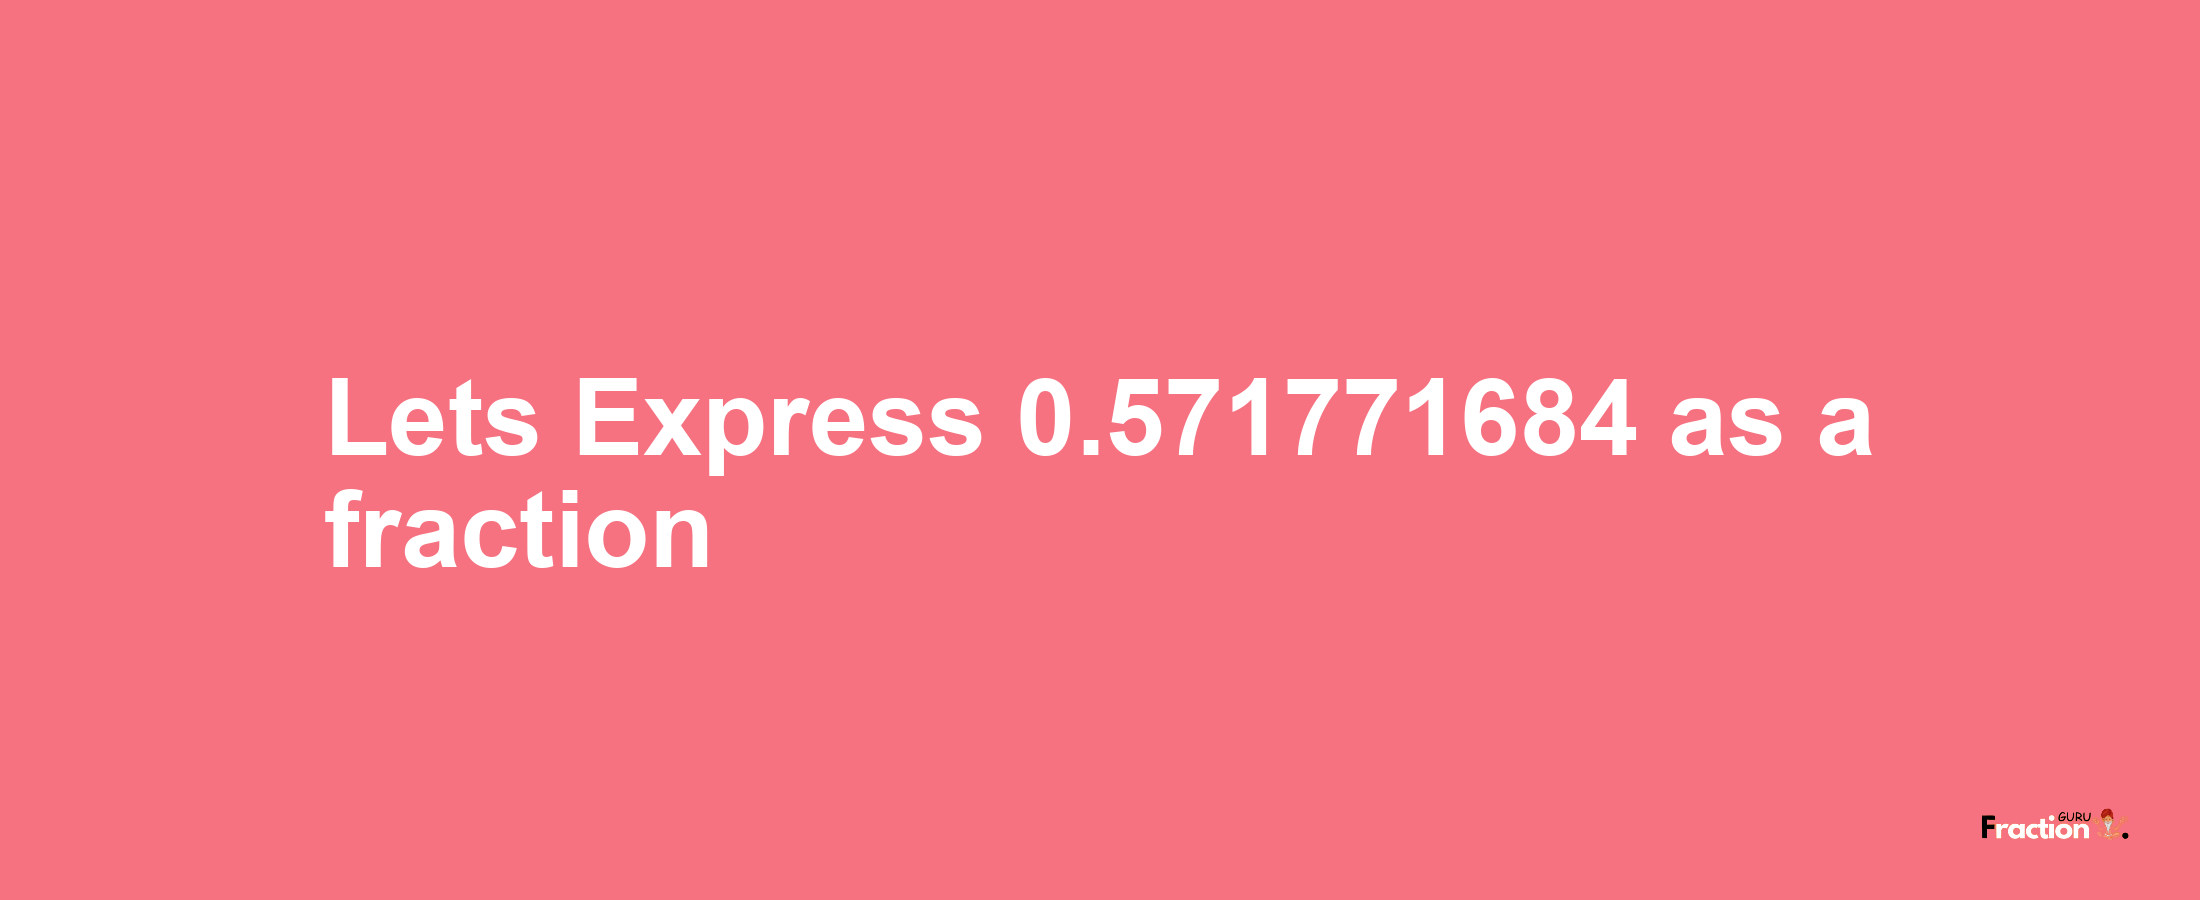 Lets Express 0.571771684 as afraction